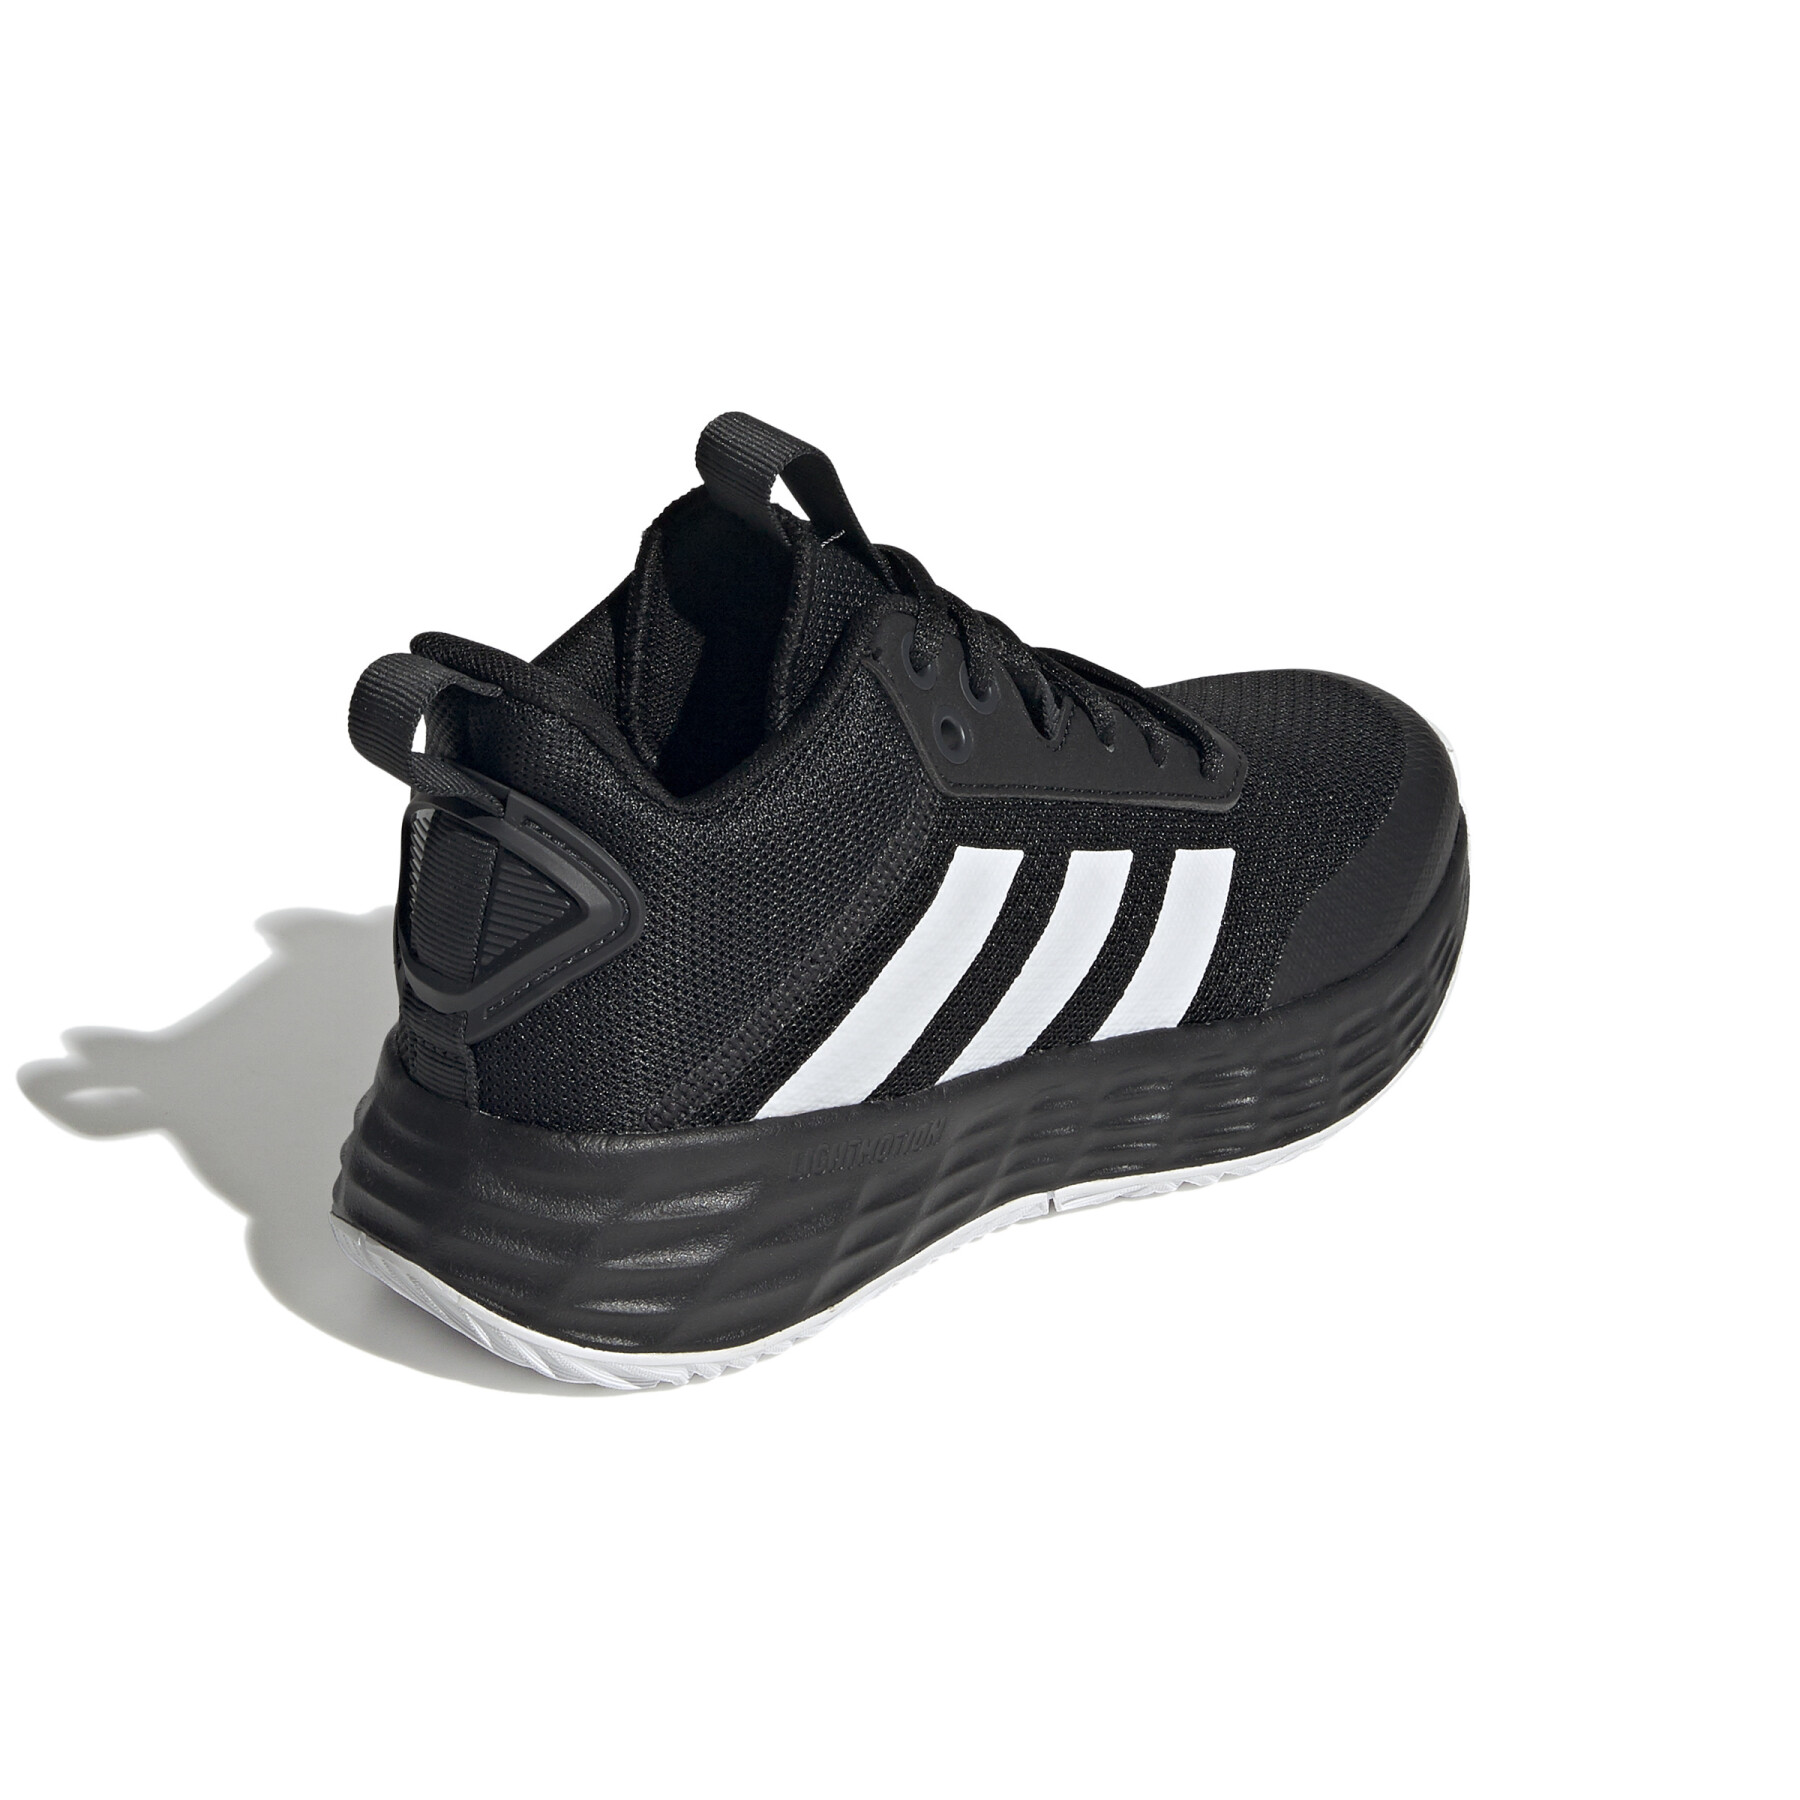 Indoor shoes for children adidas Ownthegame 2.0